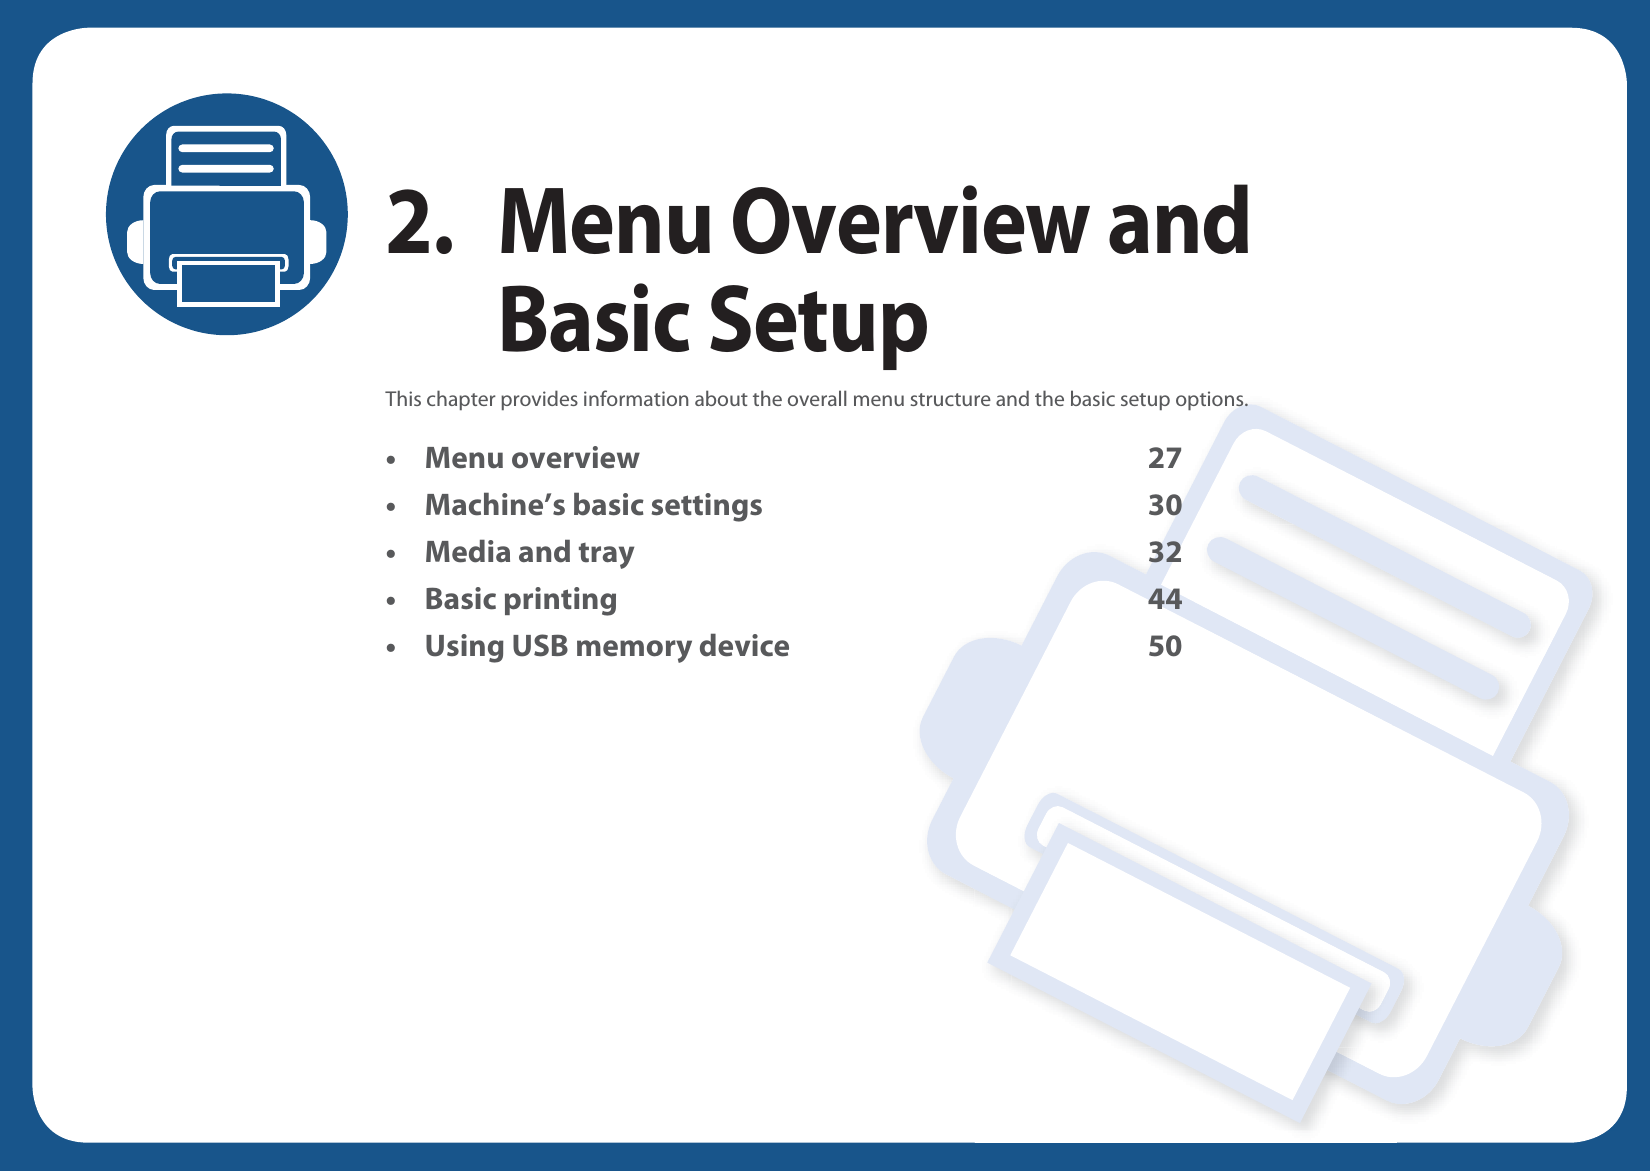 2. Menu Overview and Basic SetupThis chapter provides information about the overall menu structure and the basic setup options.• Menu overview 27• Machine’s basic settings 30• Media and tray 32• Basic printing 44• Using USB memory device 50